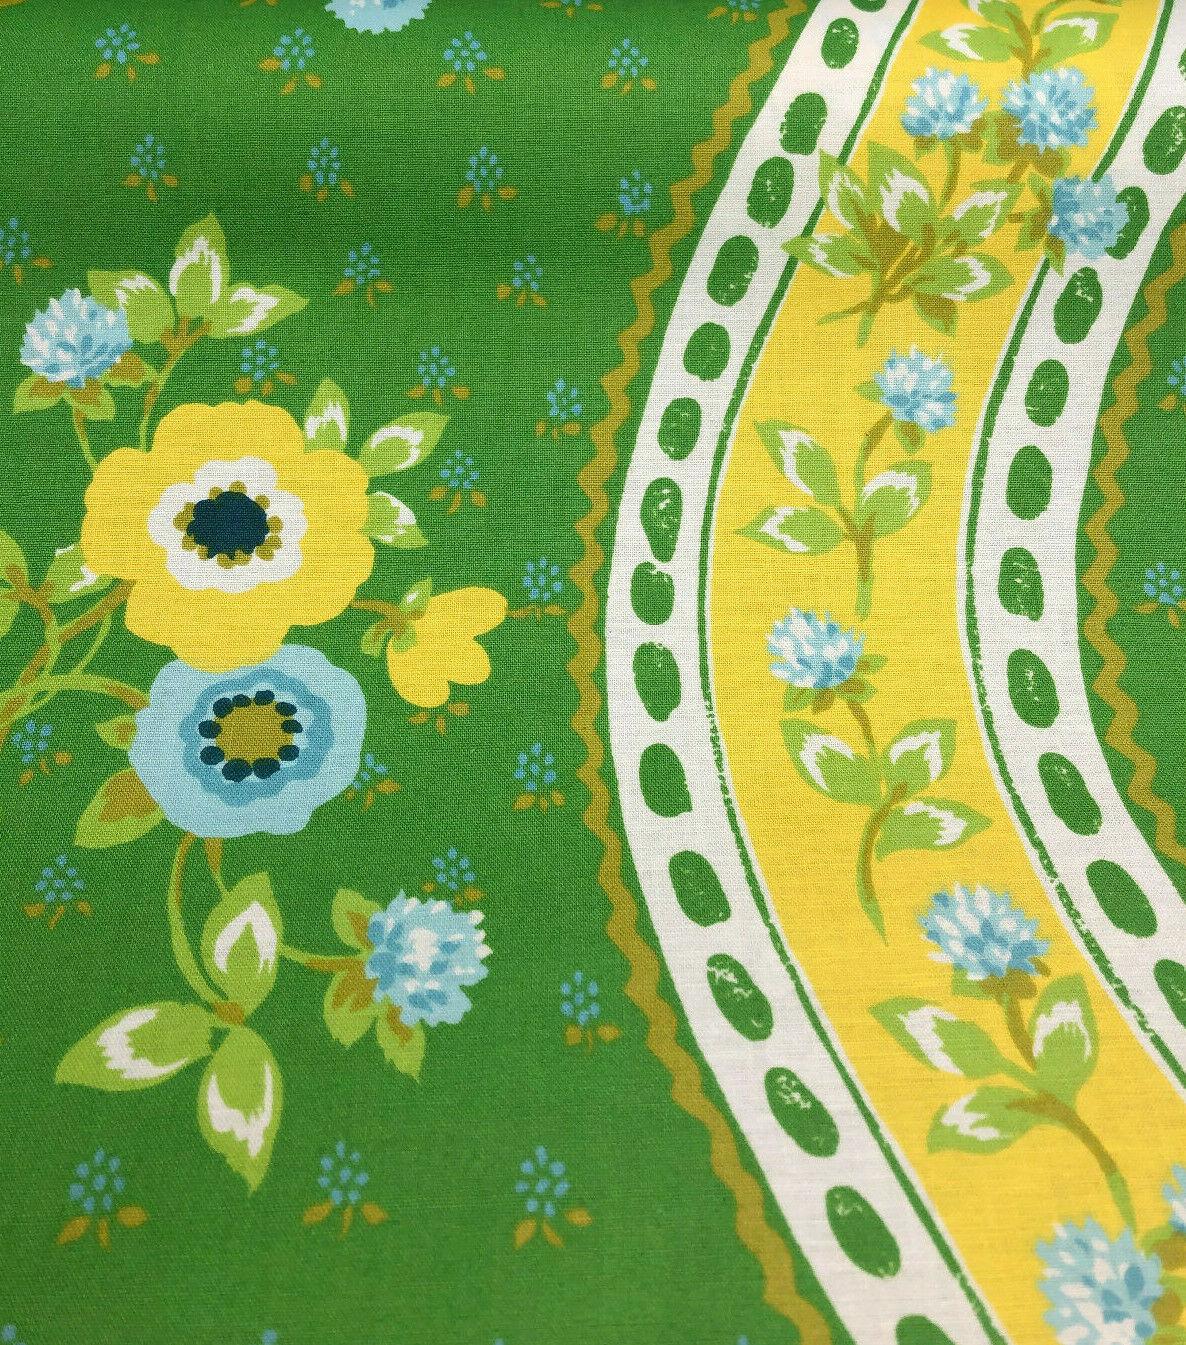 Vintage Floral Fabric in Yellow / Blue / Green